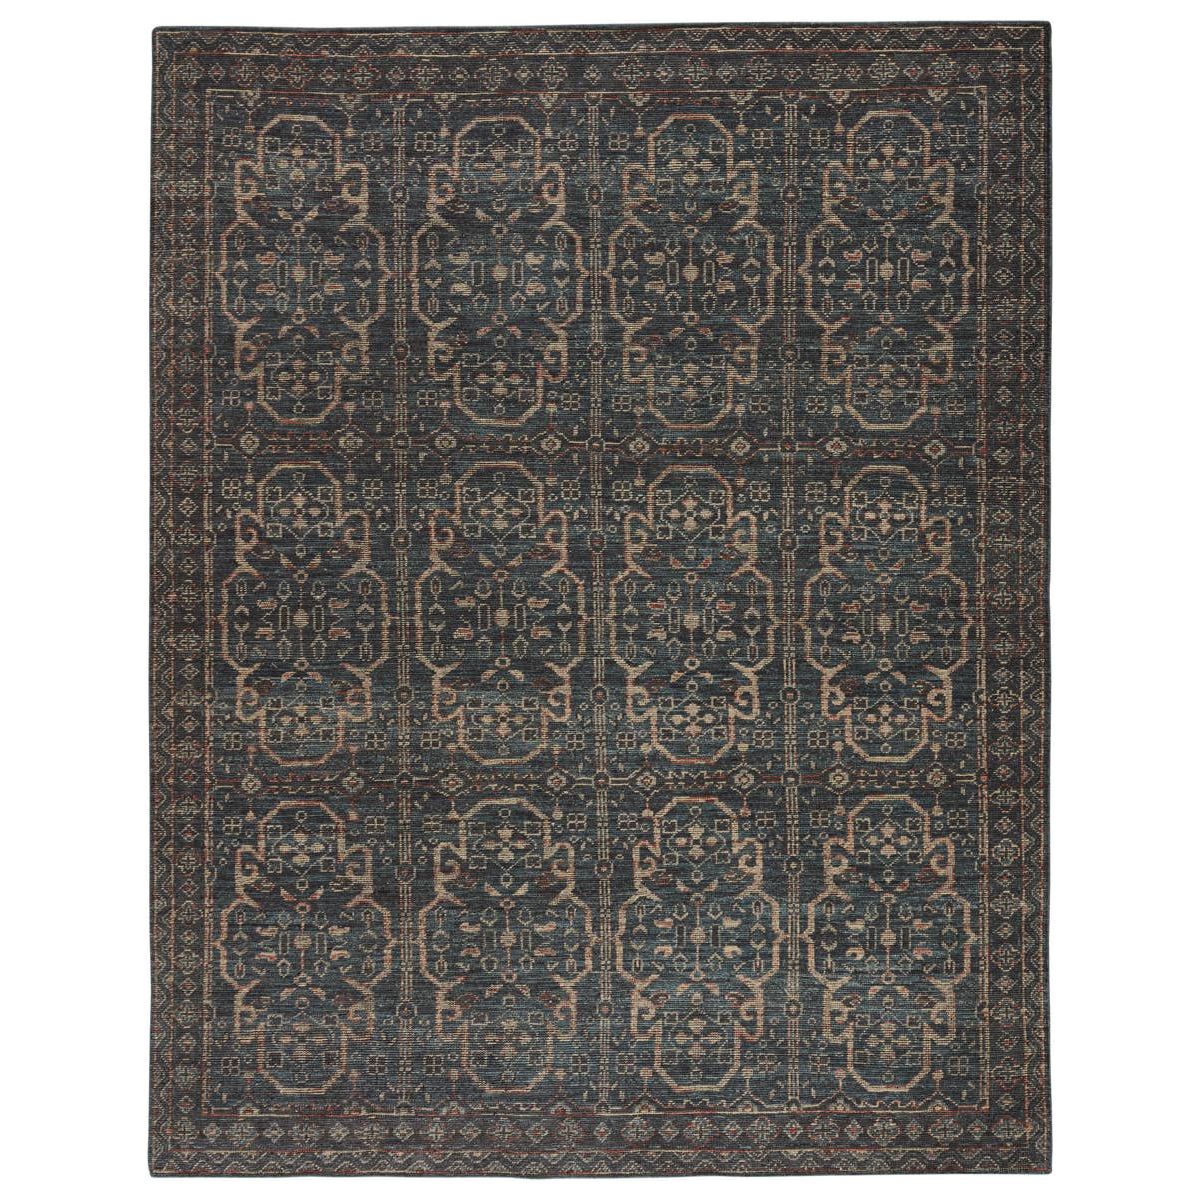 The Rhapsody Reynir Area Rug by Loloi, or RHA06, boasts a beautifully washed tile-like motif with a decorative border detail. The deep blue palette is accented with red and cream hues for added depth and intrigue. This rug is perfect for a living room, entryway, or other high traffic areas. 